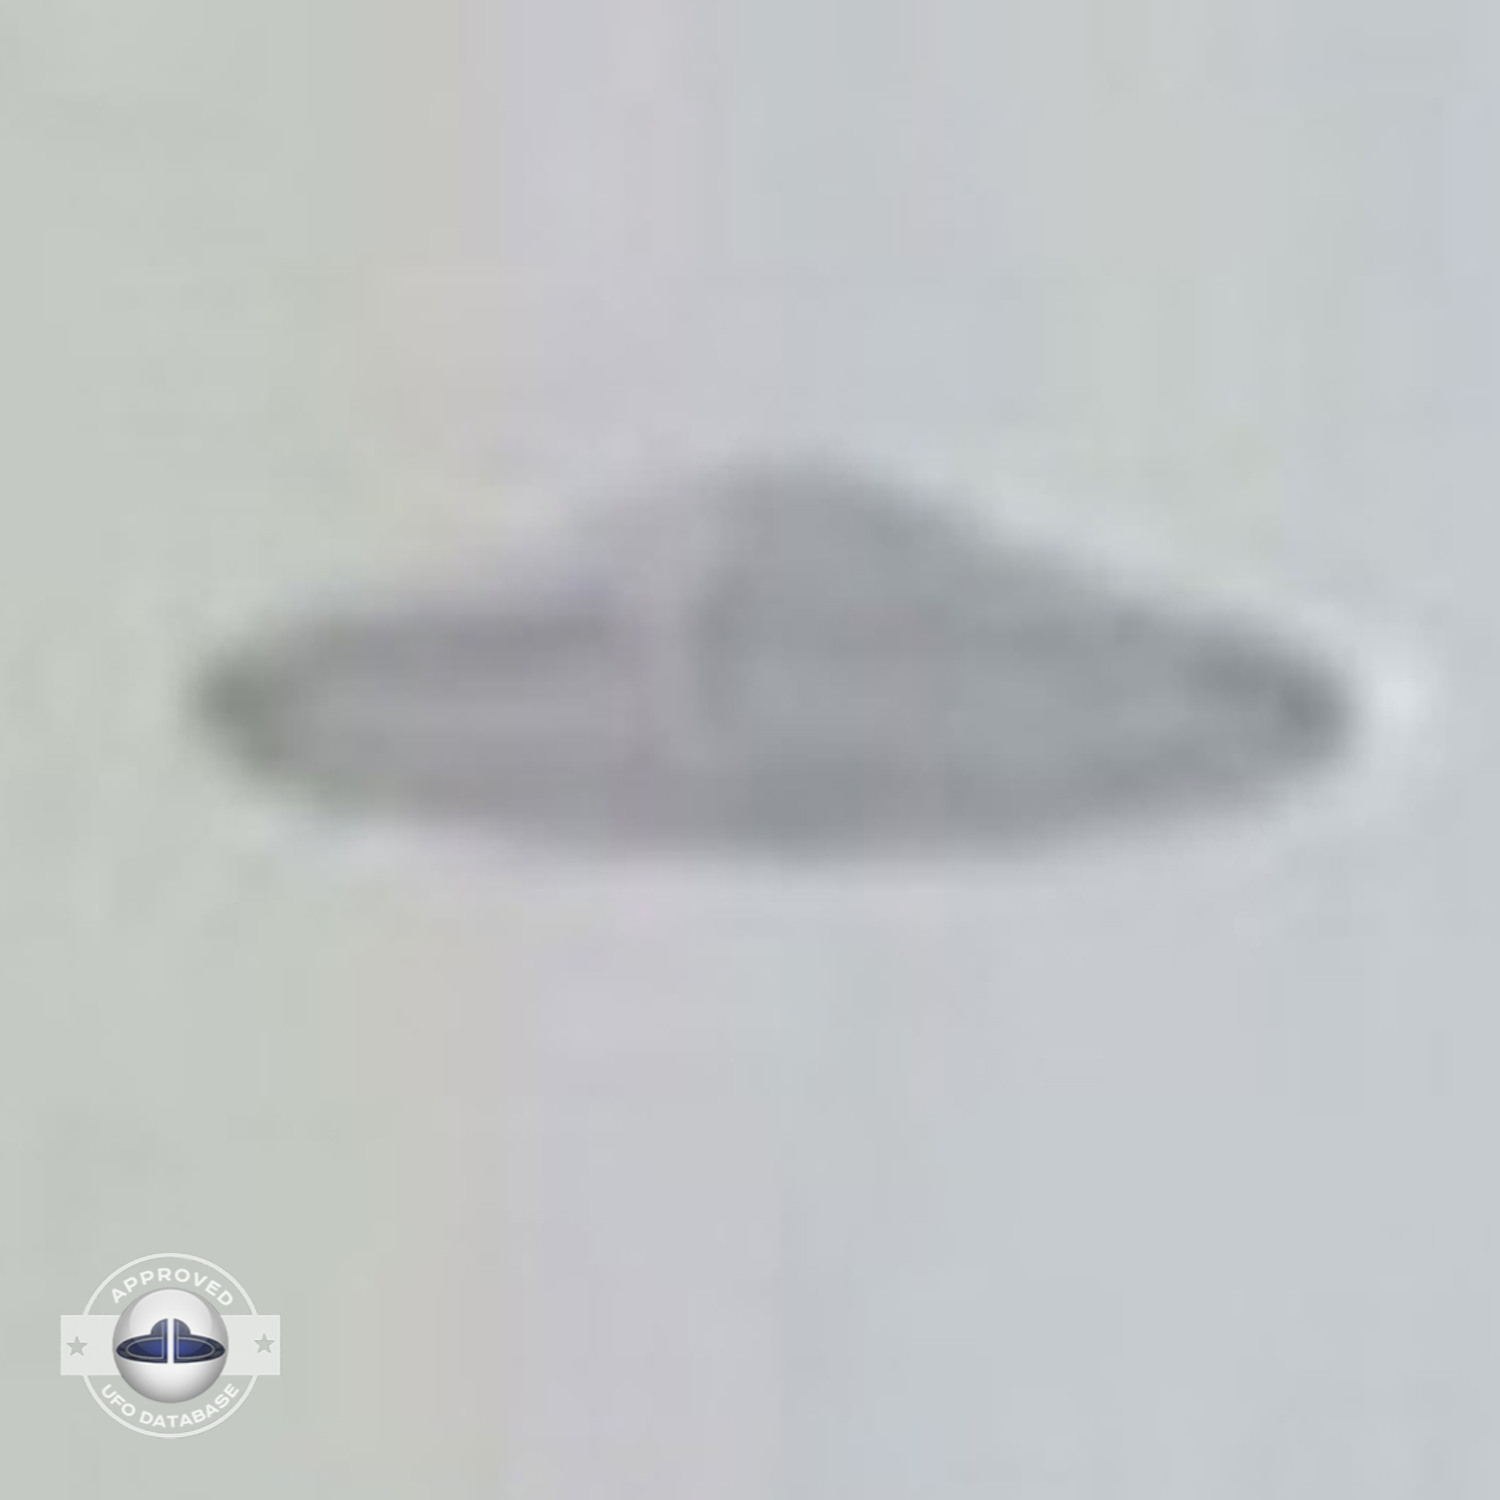 Mexico city August 6 1997 UFO Pictures from famous video (UFOdB.com) UFO Picture #55-5